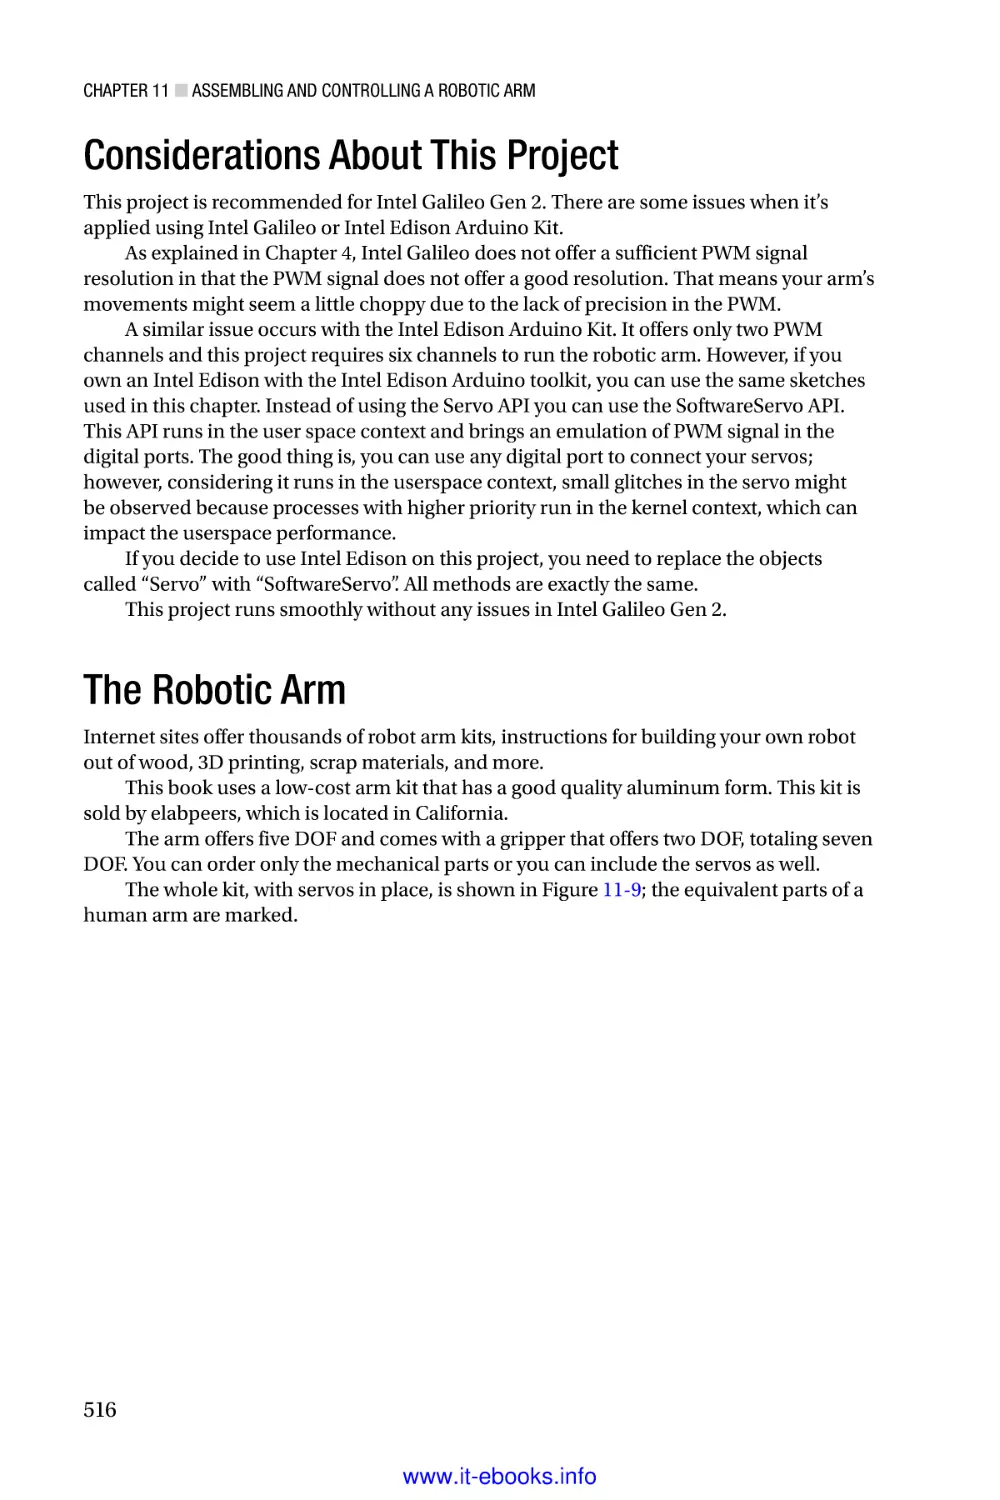 Considerations About This Project
The Robotic Arm